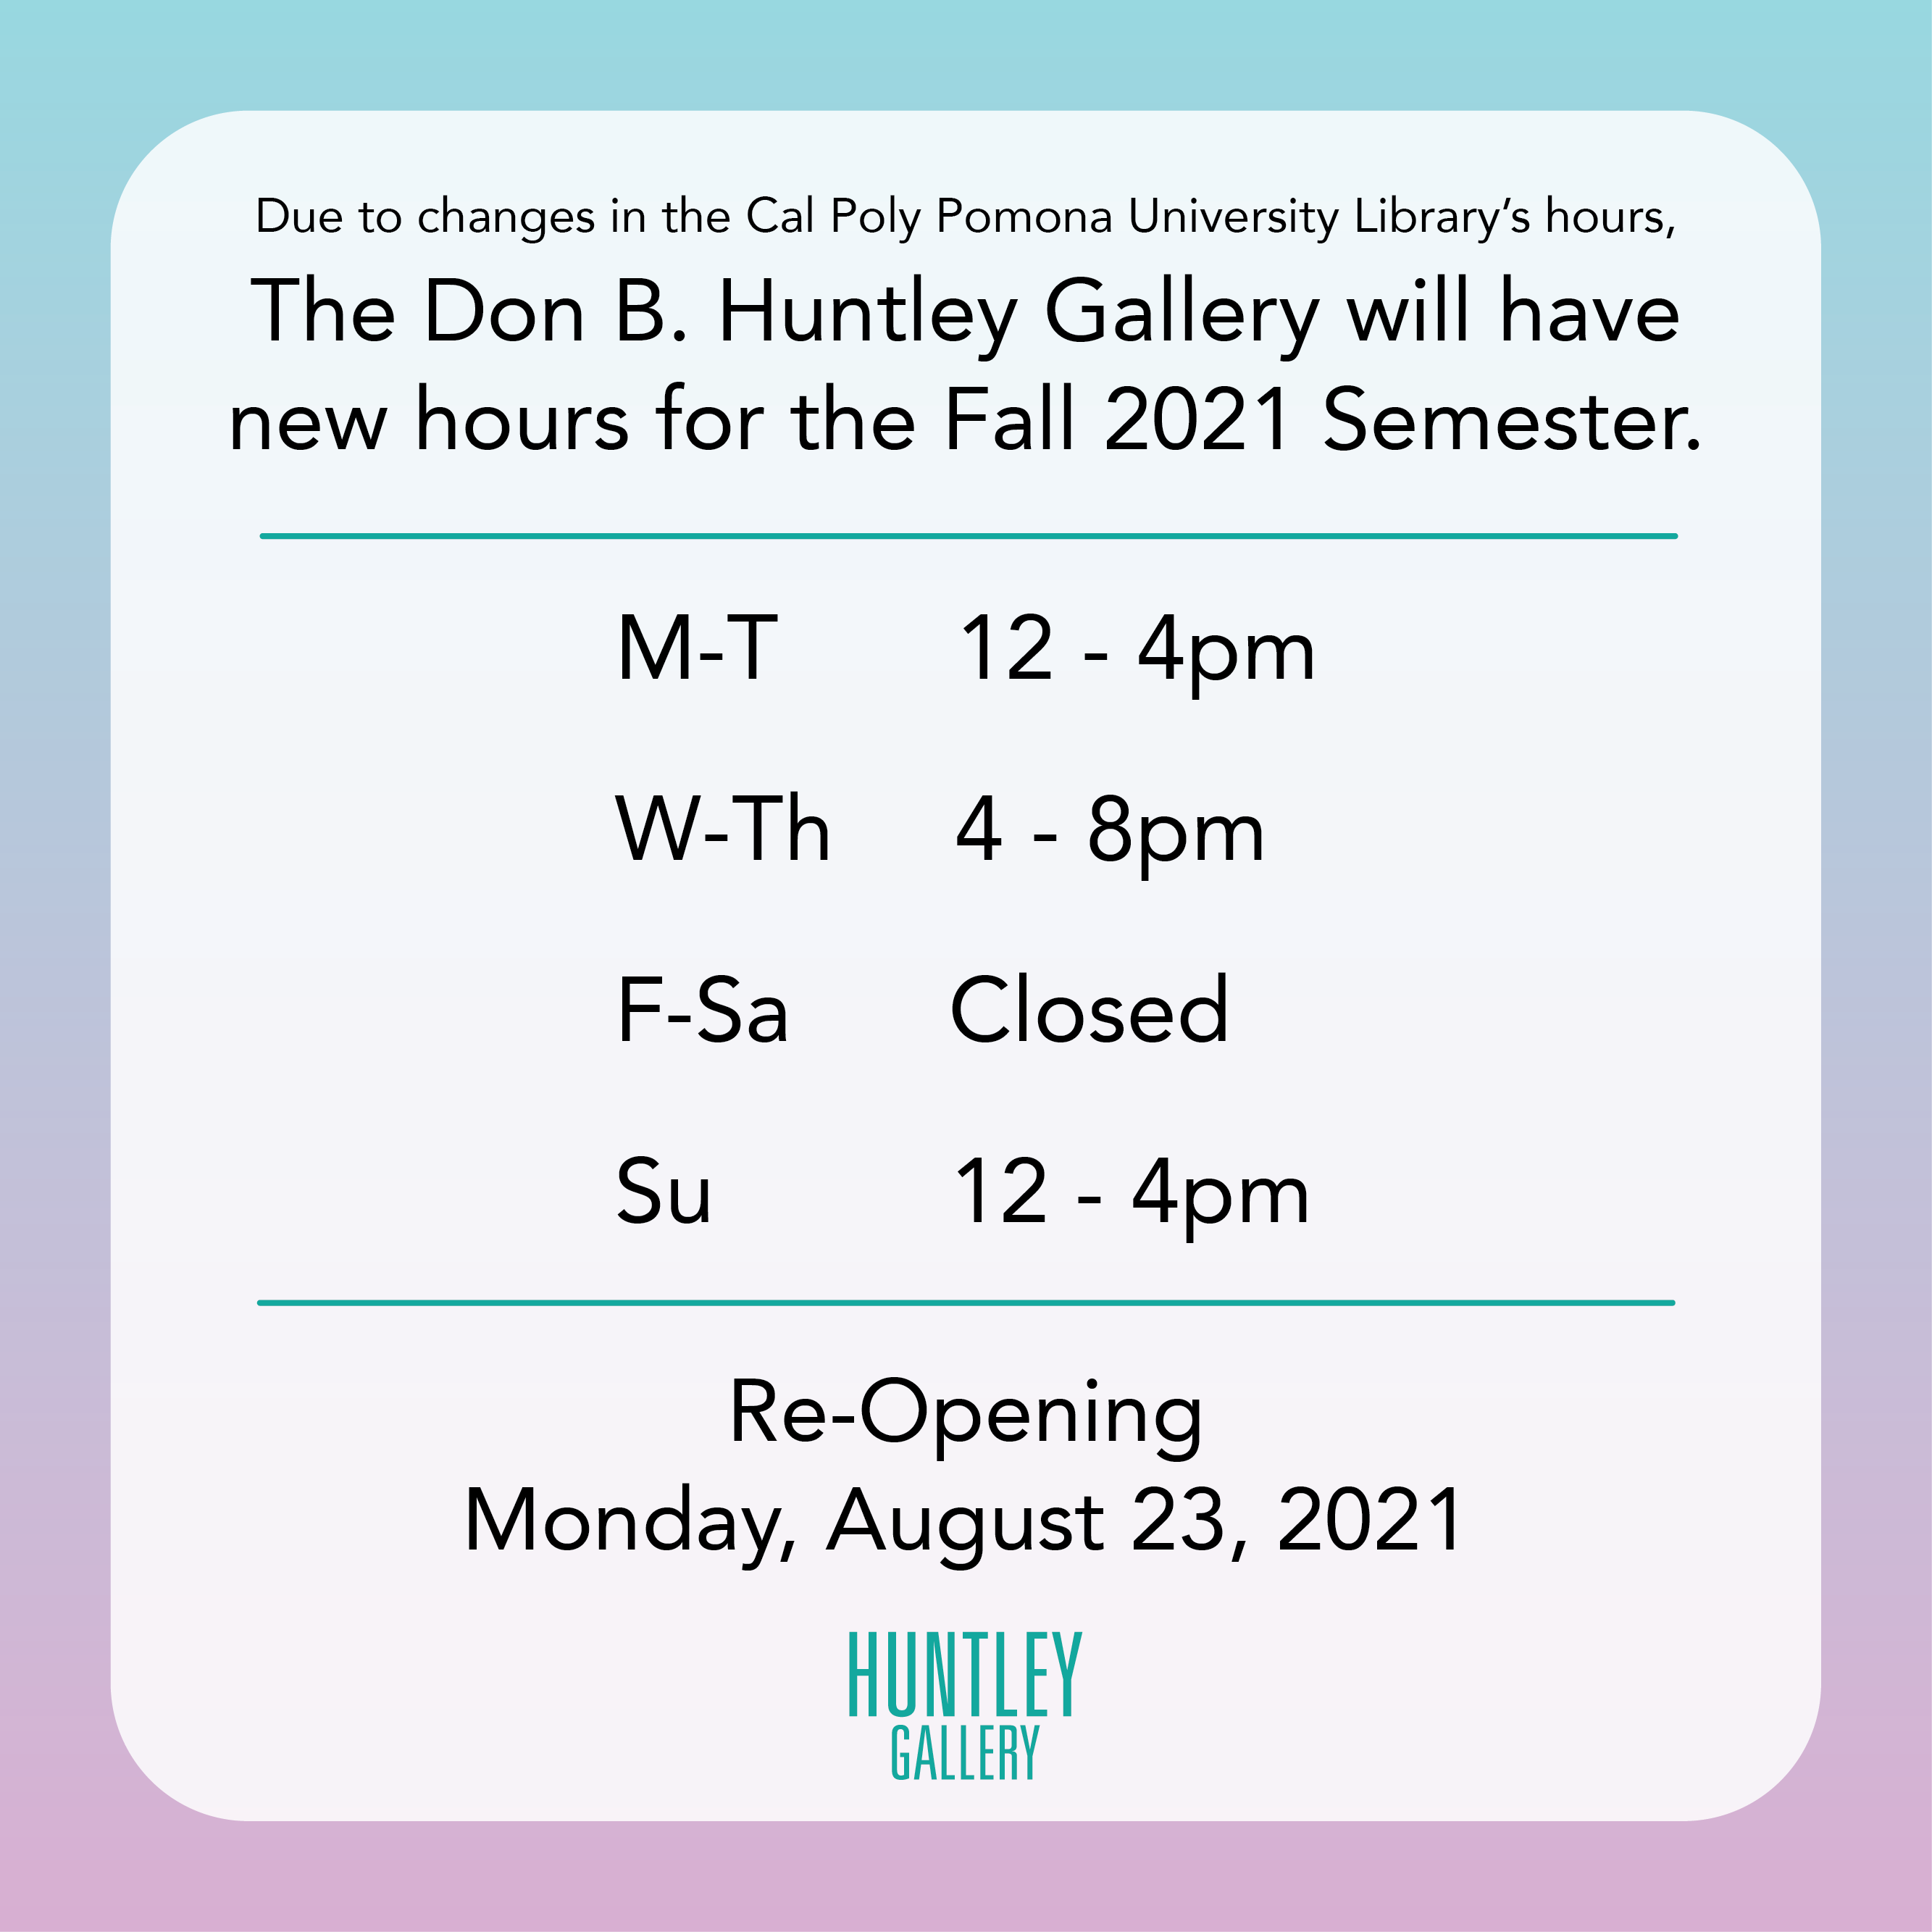 Due to changes in the Cal Poly Pomona University Library Hours, the Don. B Huntley will hav new hours for the Fall 2021 Semester Monday and Tuesday: Noon - 4 p.m. Wednesday and Thursday: 4 p.m. - 8 p.m.&nbsp; Friday and Saturday: CLOSED Sunday: Noon - 4 p.m. Re-Opening Monday, August 23, 2021